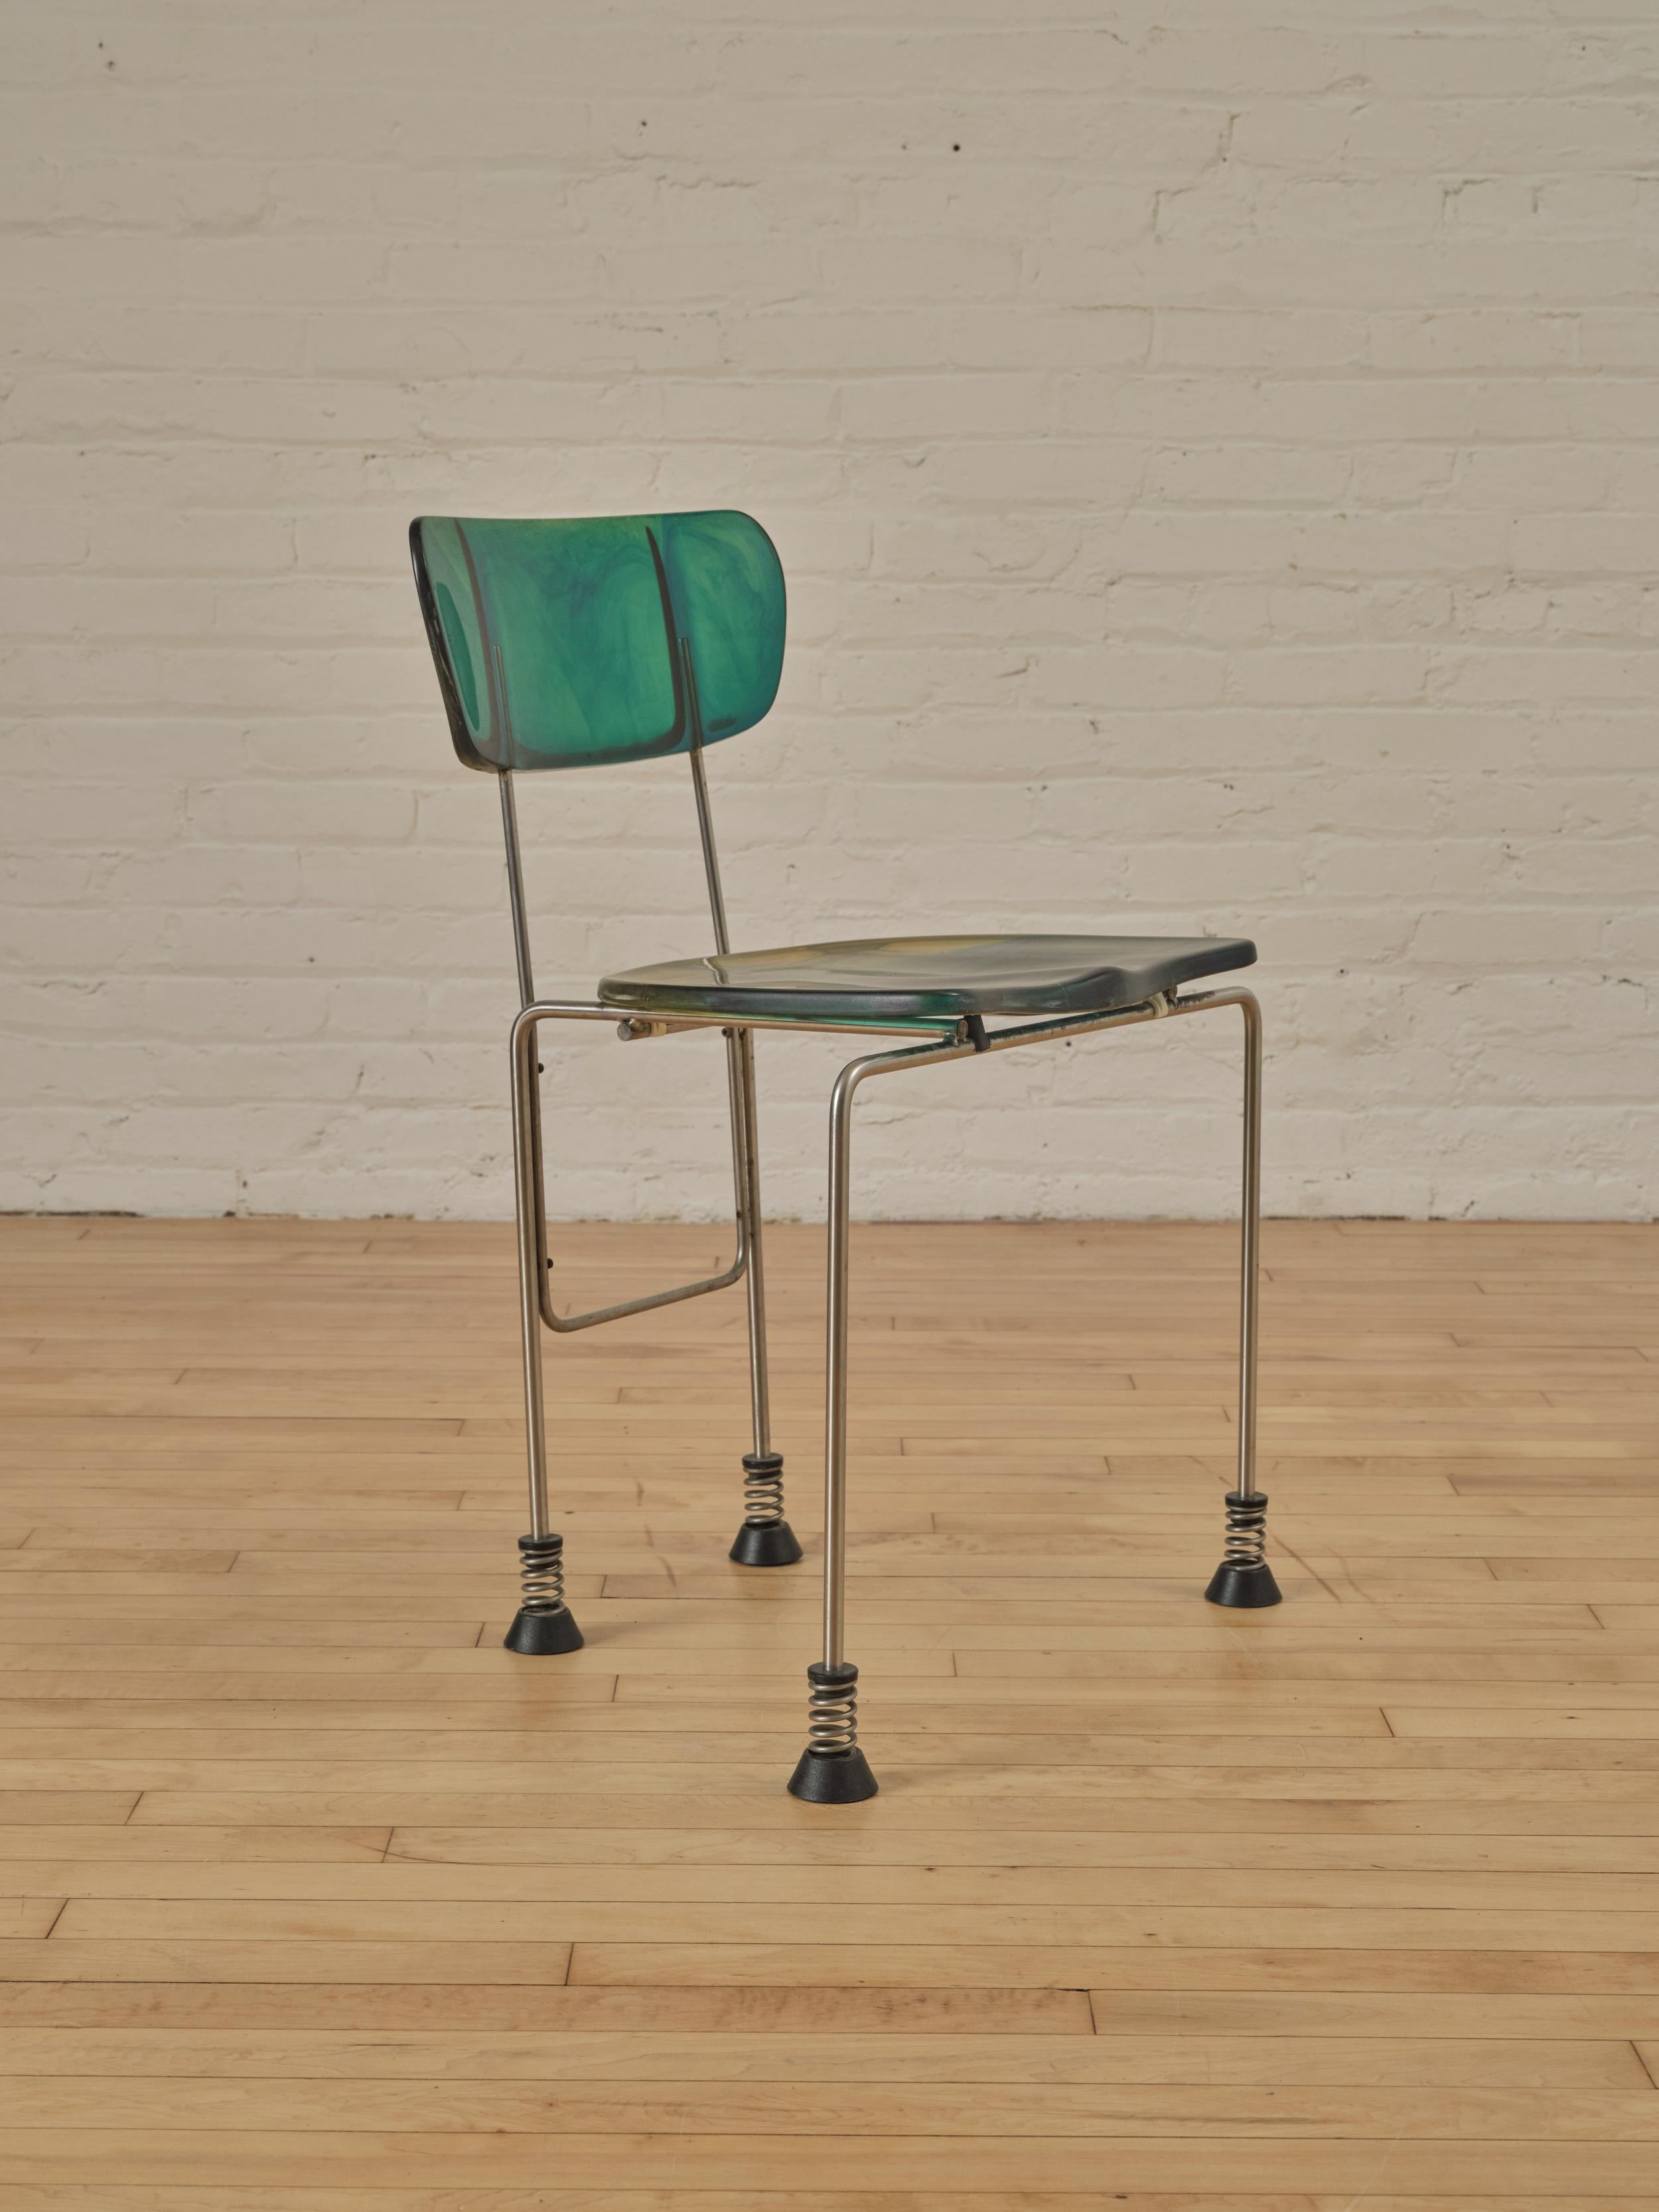 Sculptural Broadway chair designed by Gaetano Pesce for Bernini. Each chair features a marble green hue.Supported by flexible and dynamic brushed steel frame. The seat and back are cast in the Gaetano's signature resin. Finished with round spring